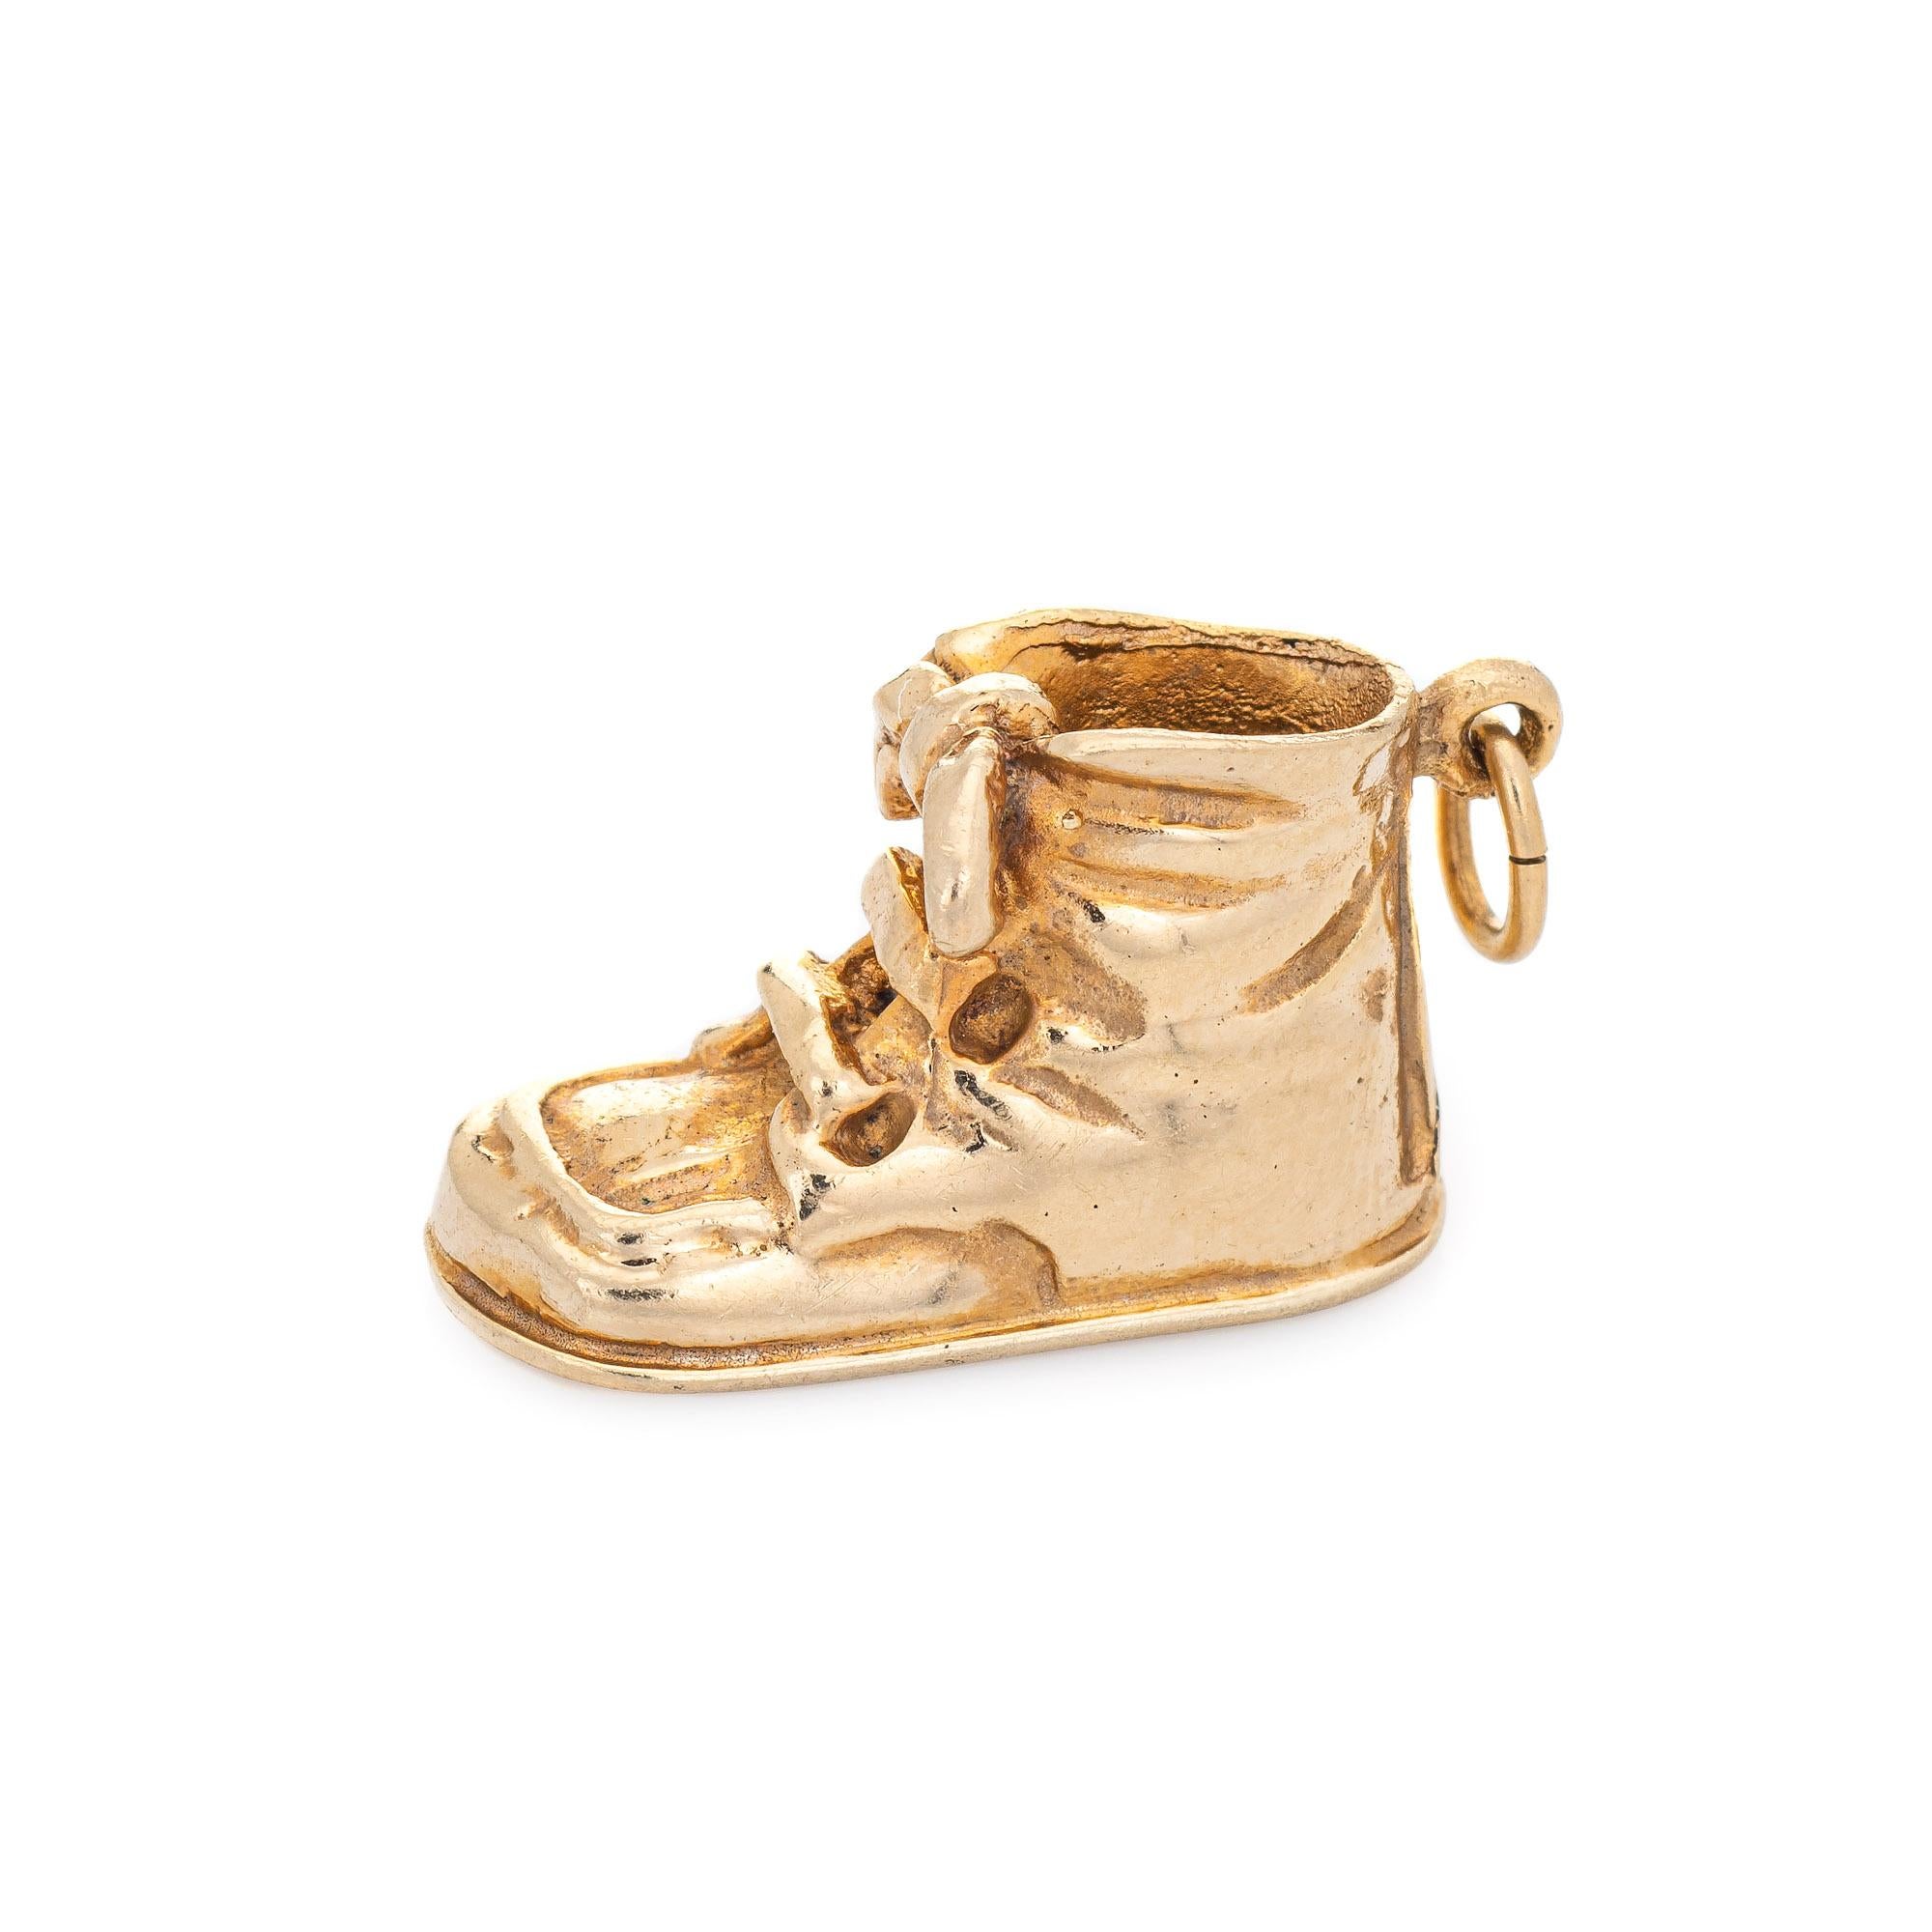 Finely detailed vintage baby shoe charm crafted in 18k yellow gold.  

The baby bootie charm features lifelike detail with creases to the upper boot and a bow tied lace. Ideal worn as a pendant or on a charm bracelet.

The charm is in very good